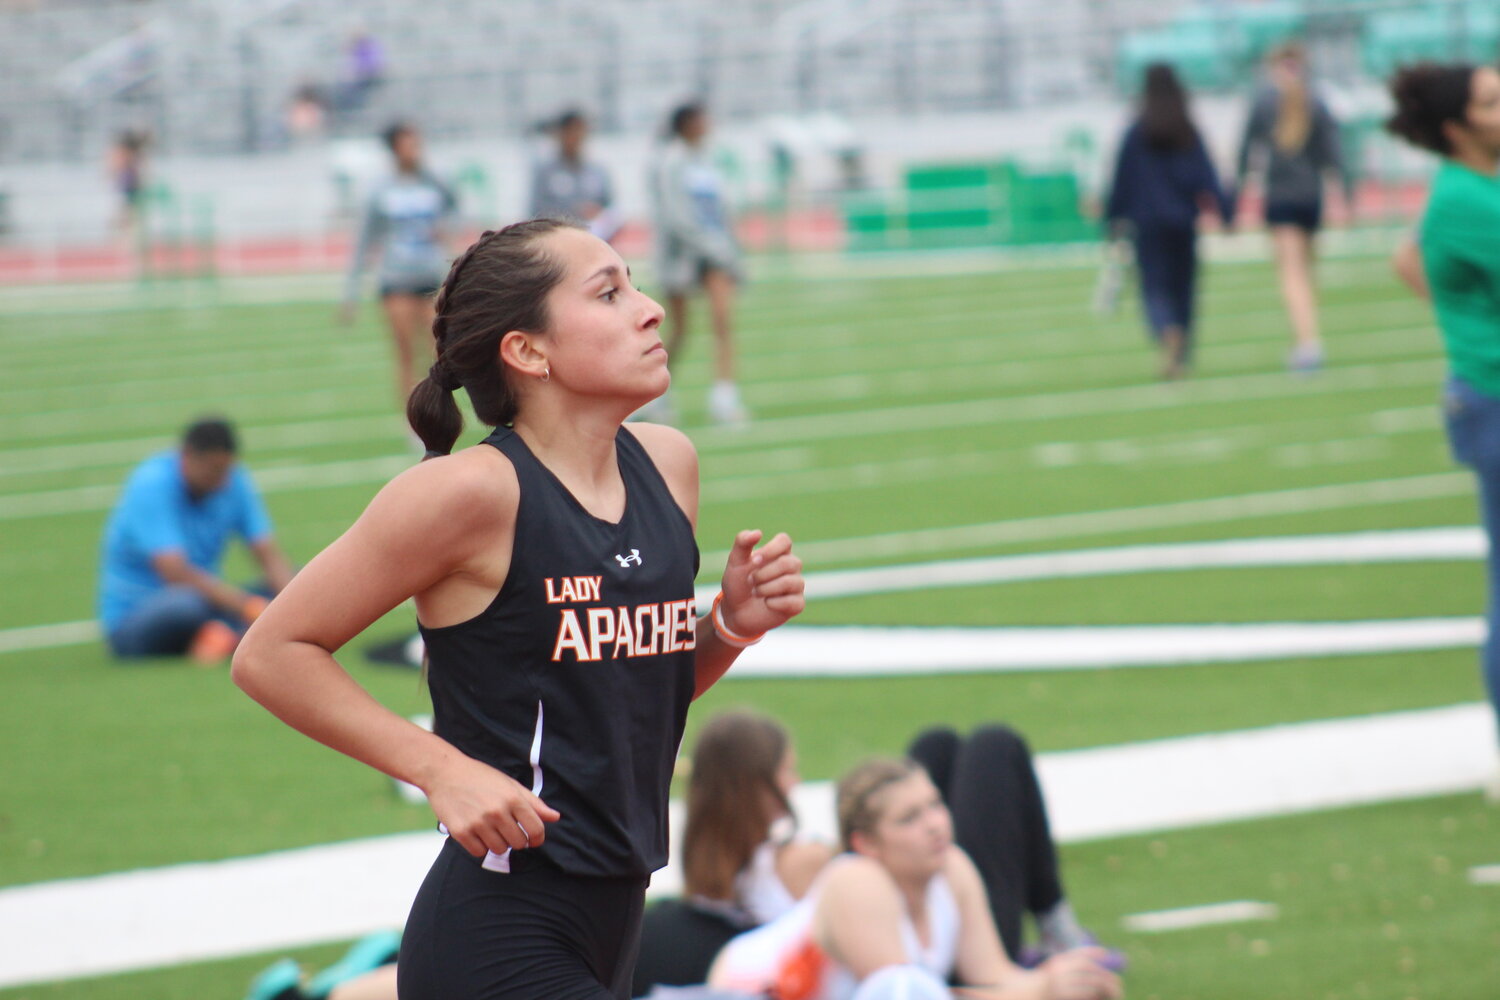 Lady Apaches’ Jordyn Gonzales competes in the 1600m race at the Cuero meet.